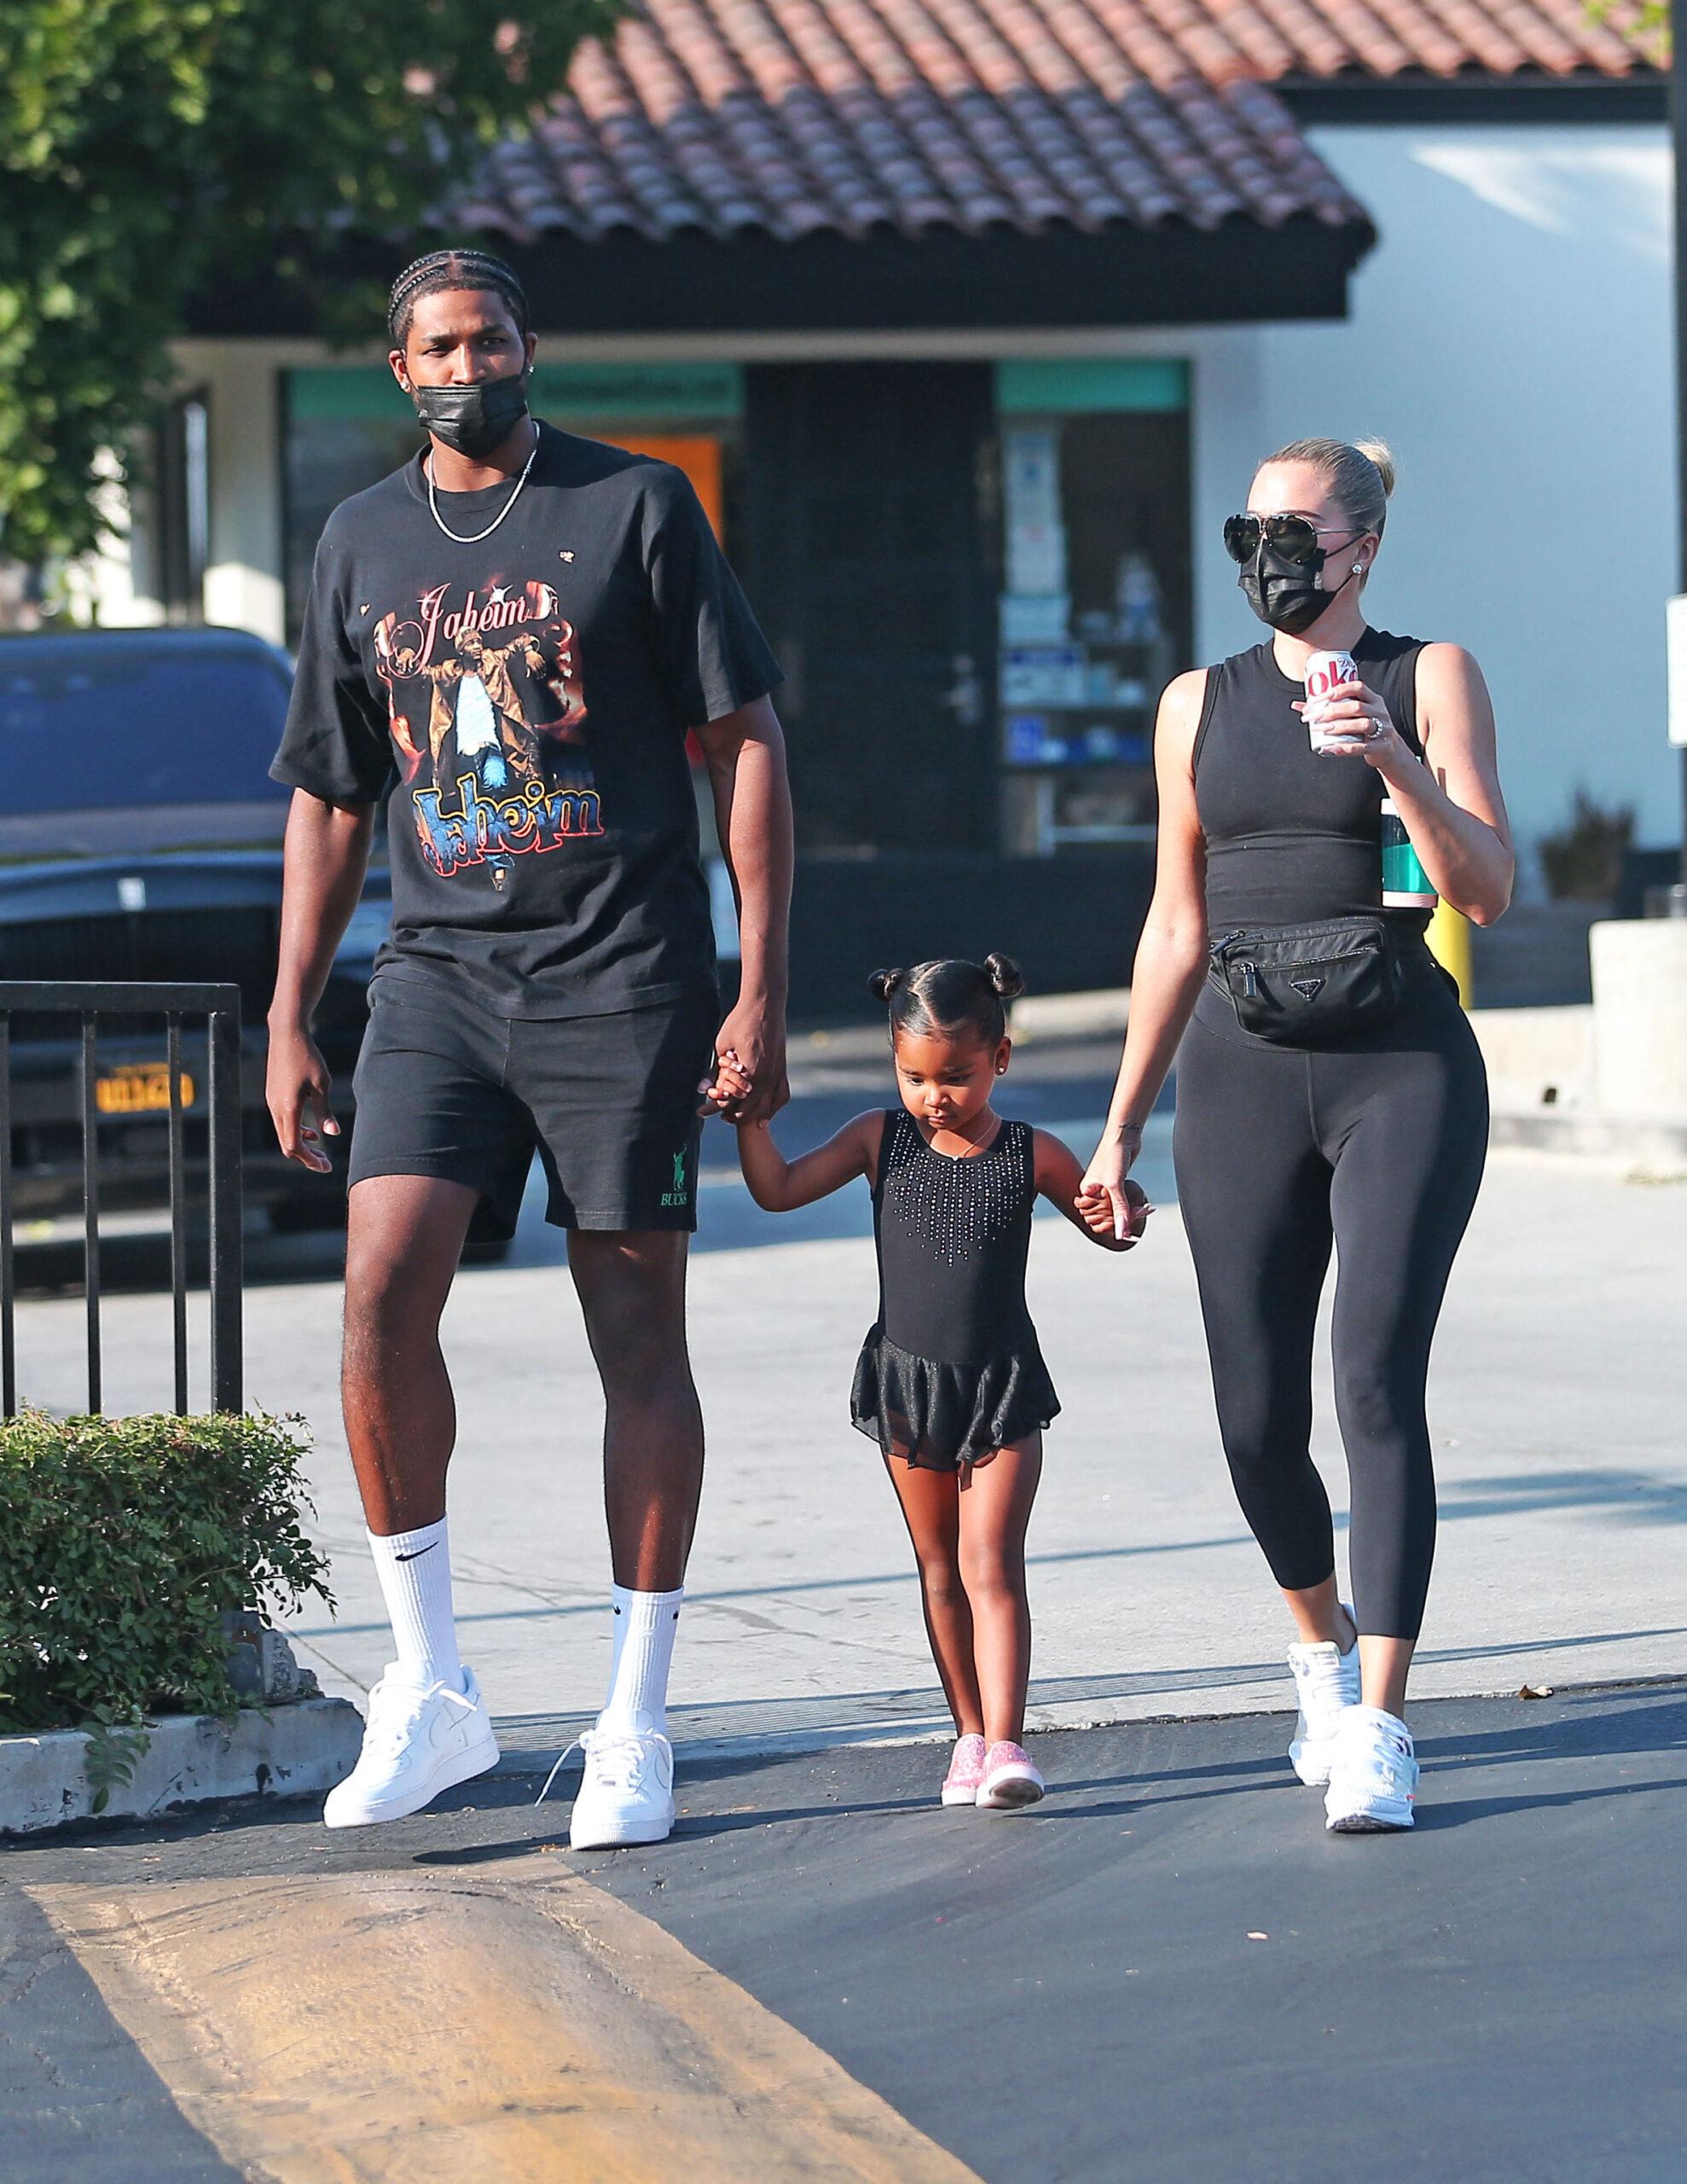 Khloe Kardasian's Ex Tristan Thompson Files For Guardianship Over His Brother